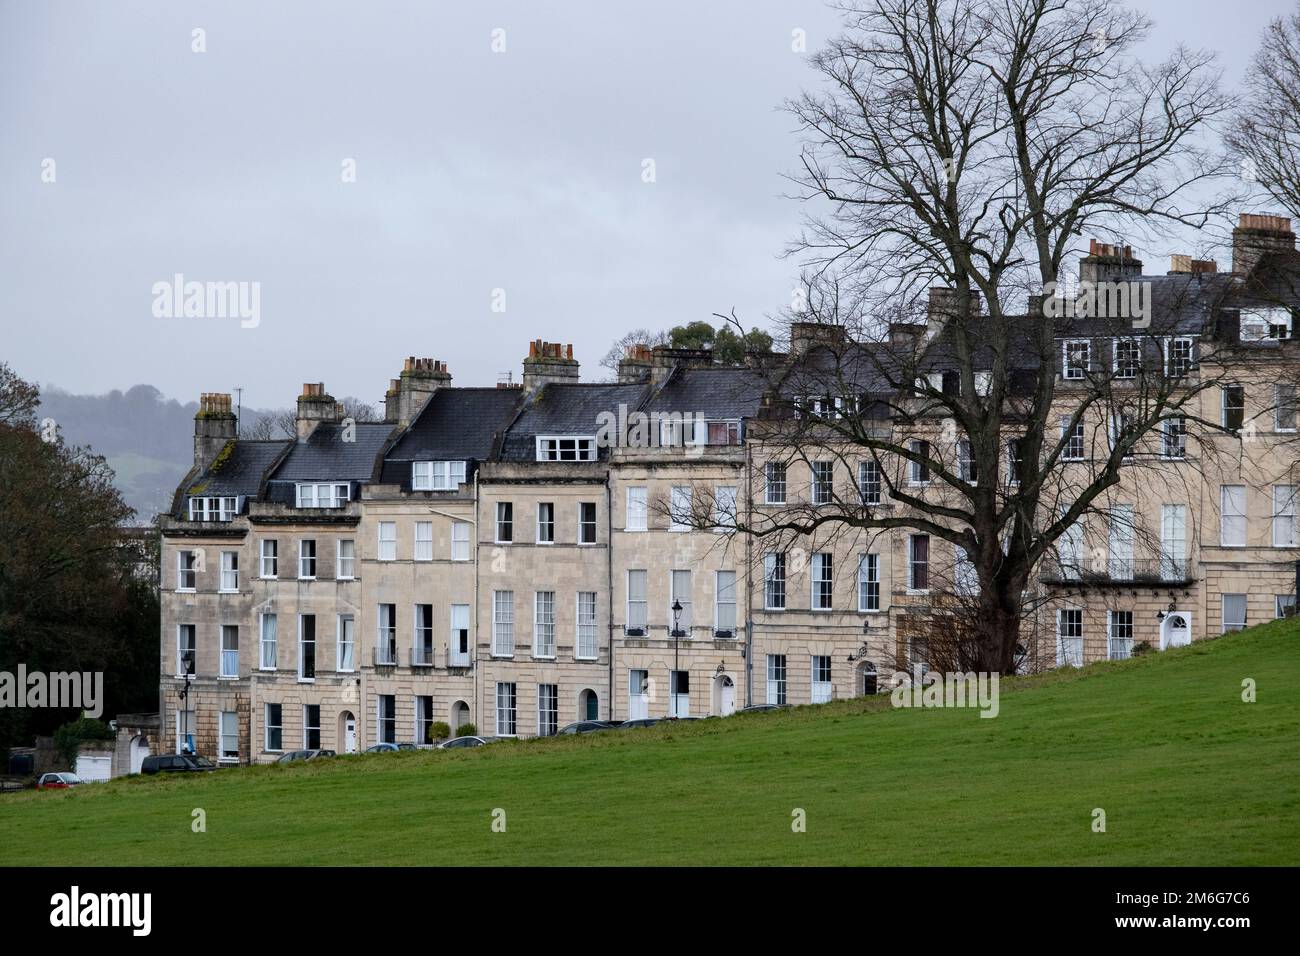 View of terraced homes along the street Marborough Buildings on 27th December 2022 in Bath, United Kingdom. Bath is a city in the county of Somerset, known for and named after its Roman-built baths, and Georgian architecture made from the local honey coloured Bath Stone. The city became a World Heritage Site in 1987, and was later added to the transnational World Heritage Site known as the ‘Great Spa Towns of Europe’ in 2021. Stock Photo